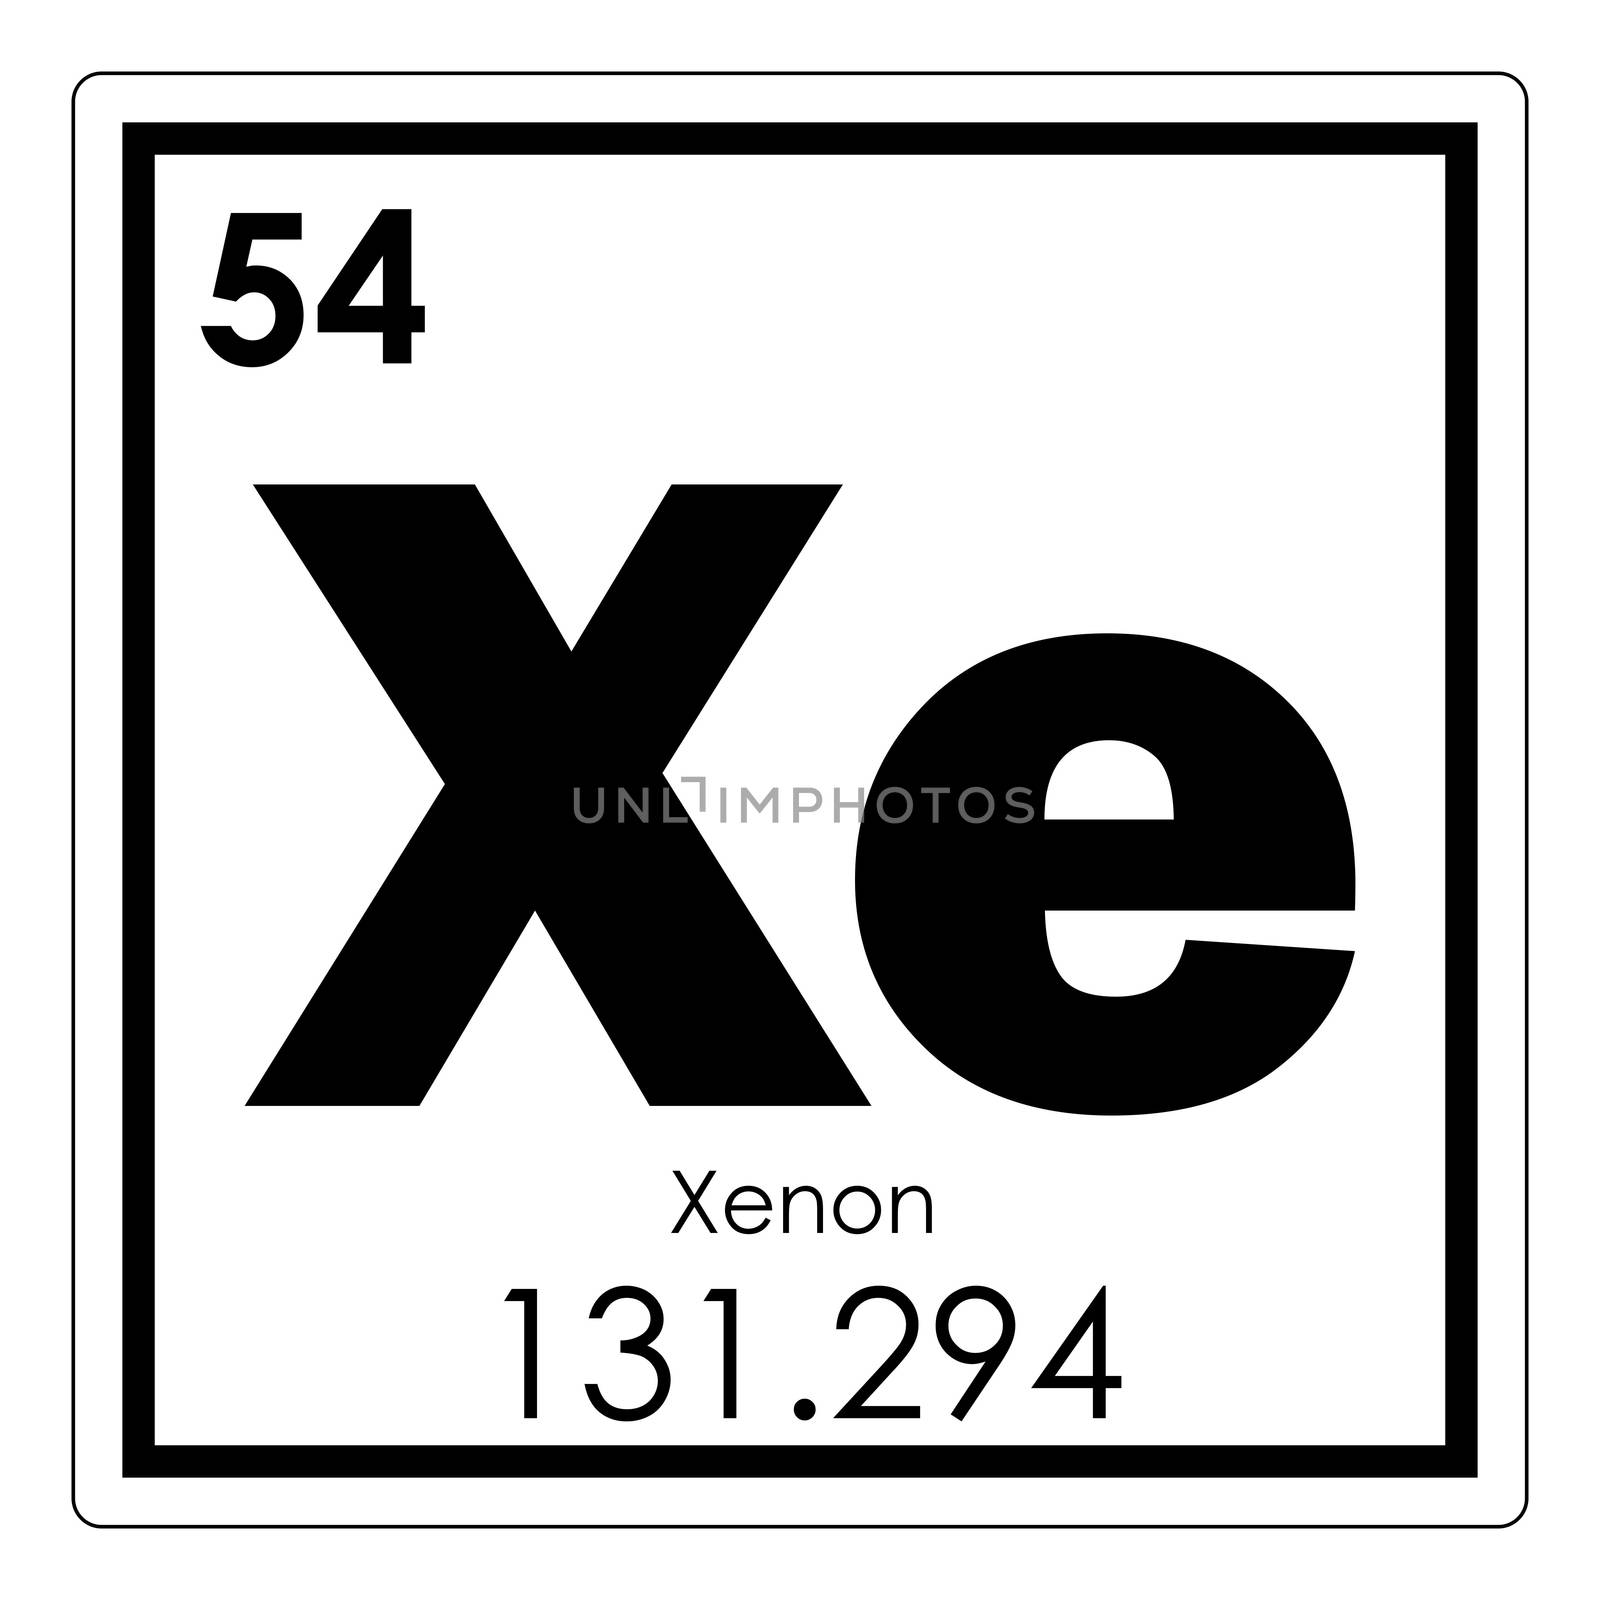 Xenon chemical element periodic table science symbol